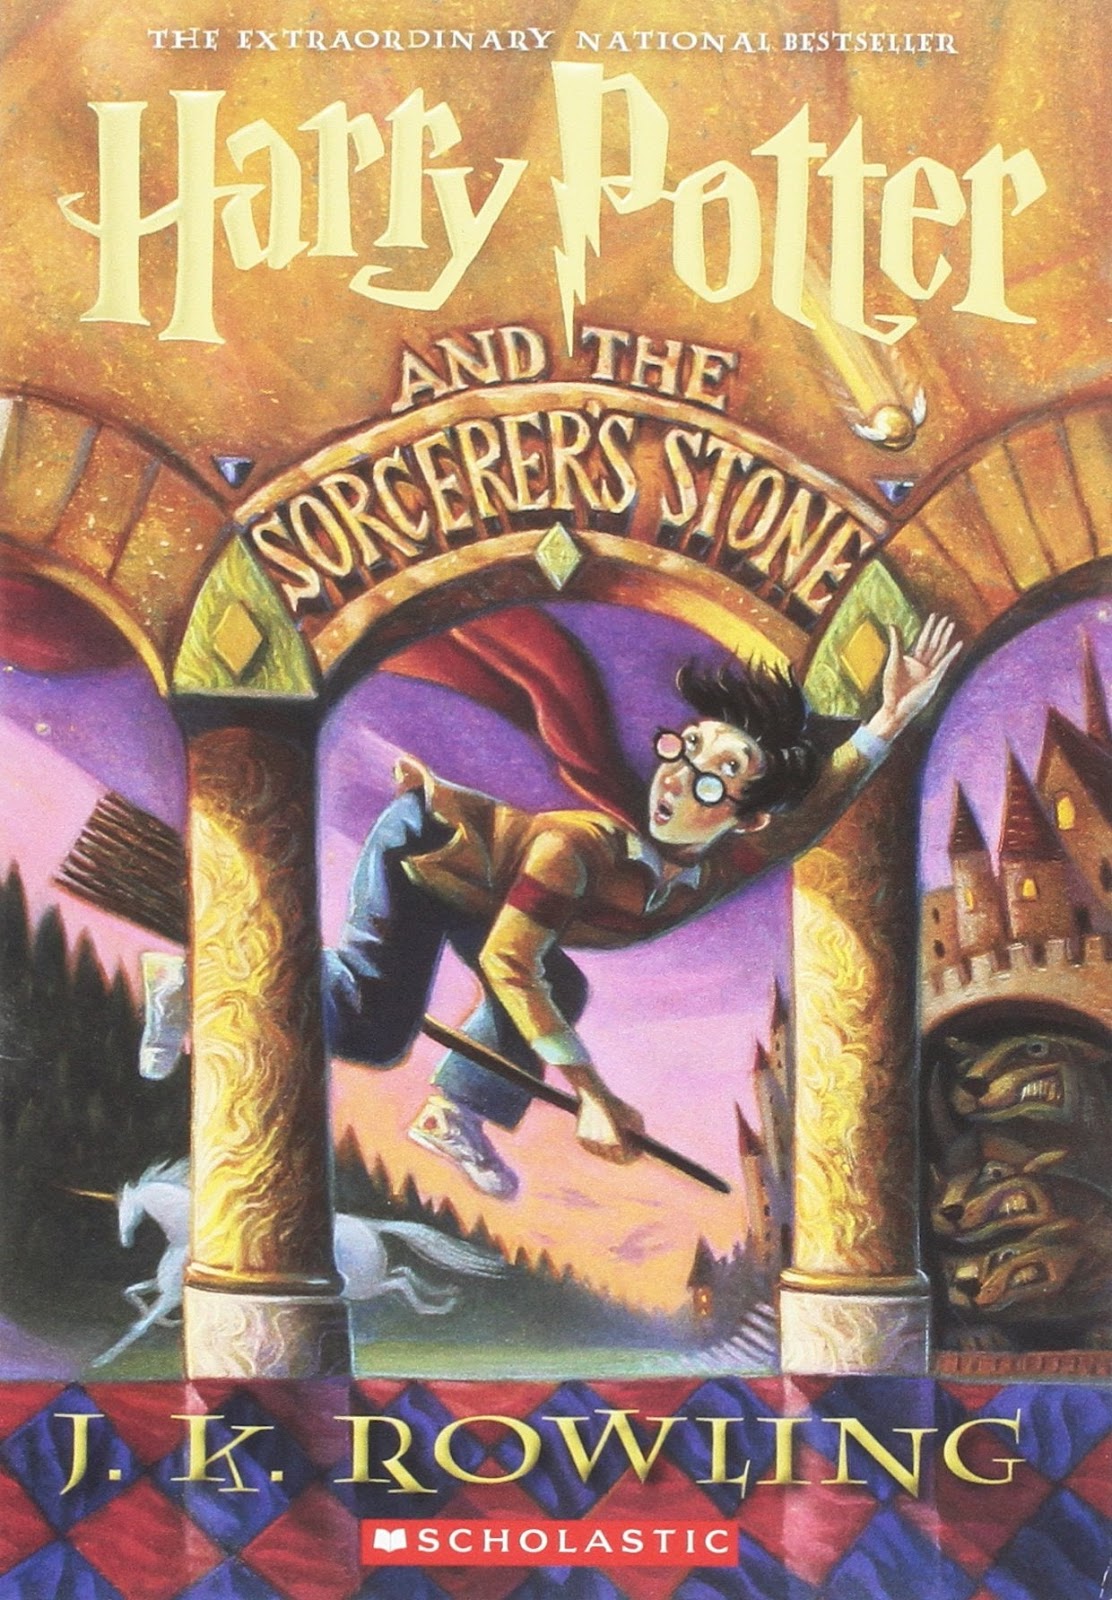 Harry Potter and the Sorcerer's Stone By J.K. Rowling: Best-Selling Books